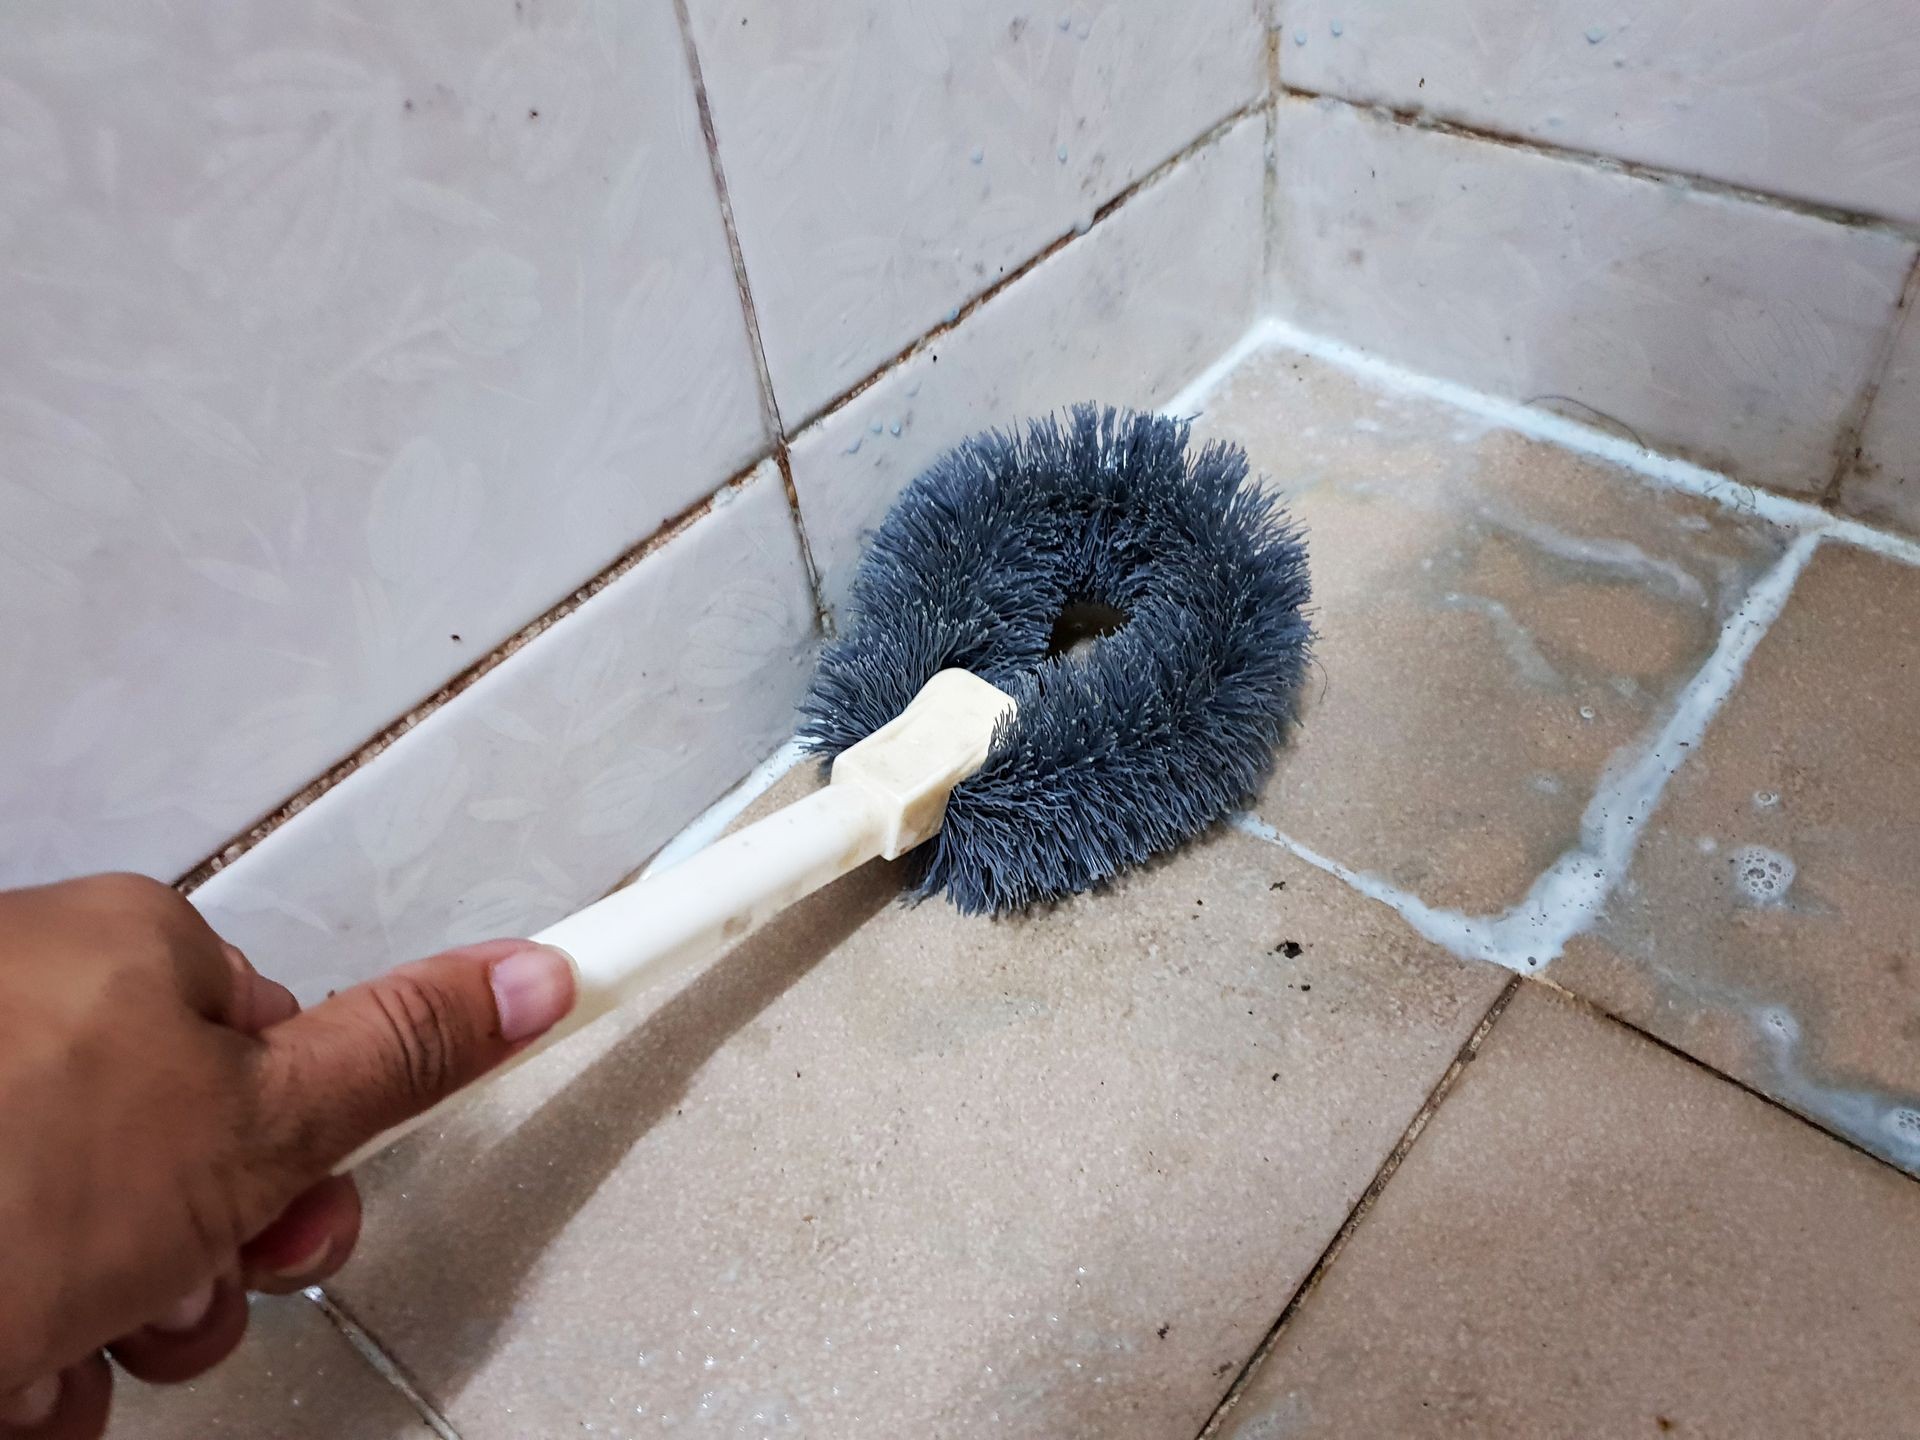 Cleaning brushes and bathroom cleaning liquid over detail of dirty stain floor in restroom.